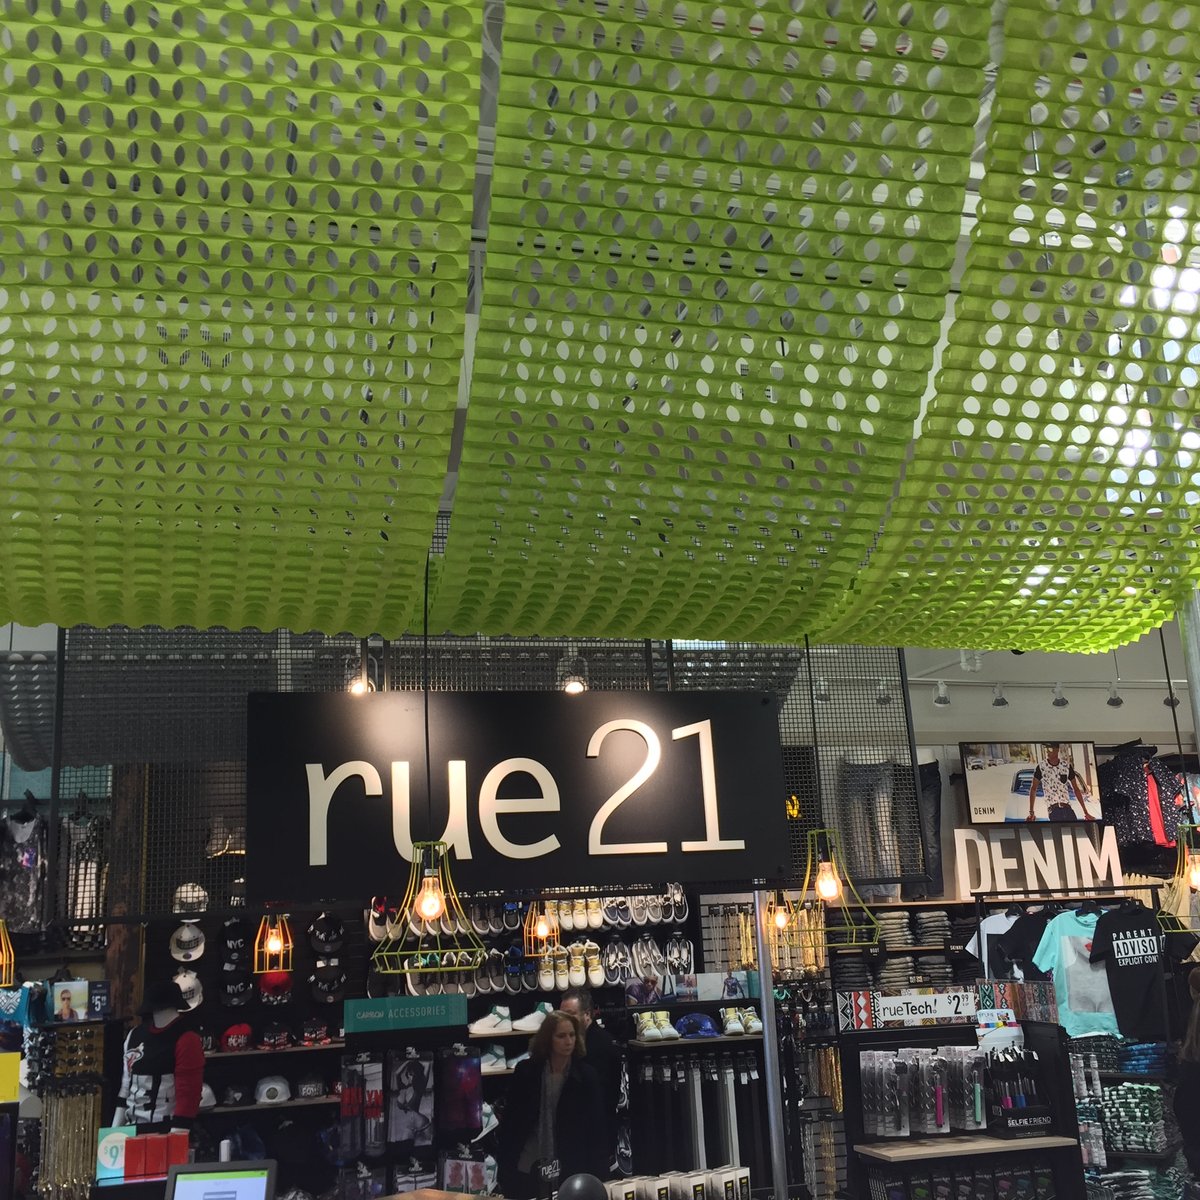 Rue21 closing hundreds of stores nationwide, including 4 in Houston -  Houston Business Journal